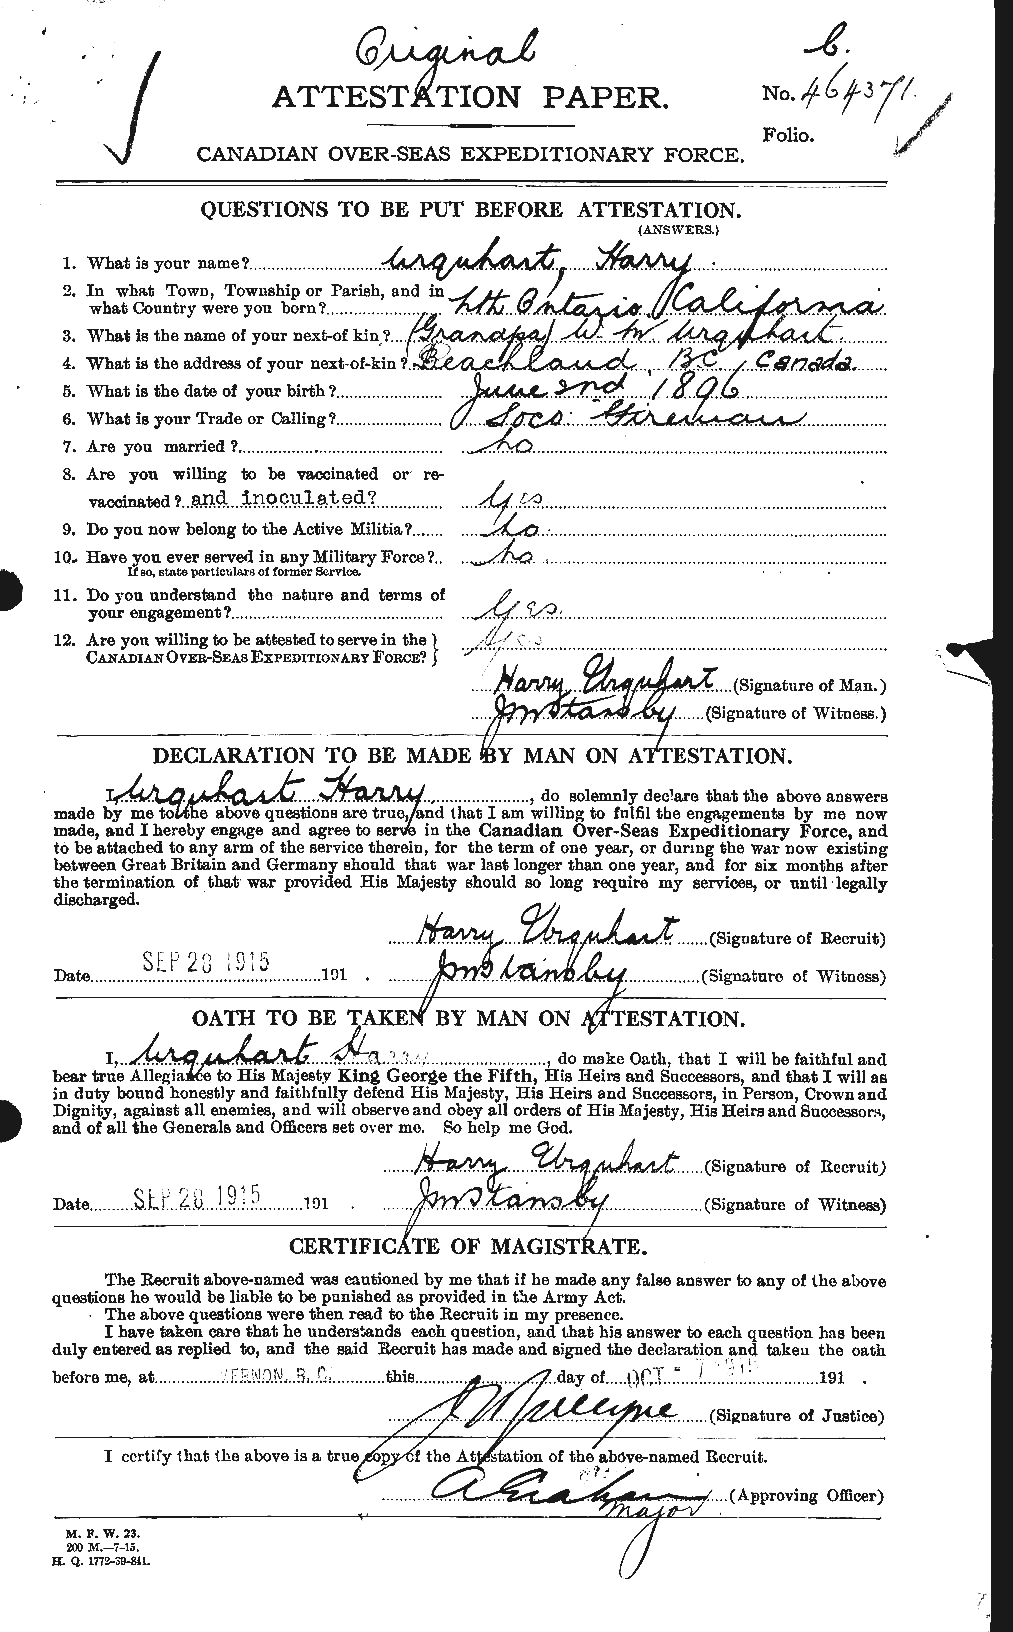 Personnel Records of the First World War - CEF 643341a